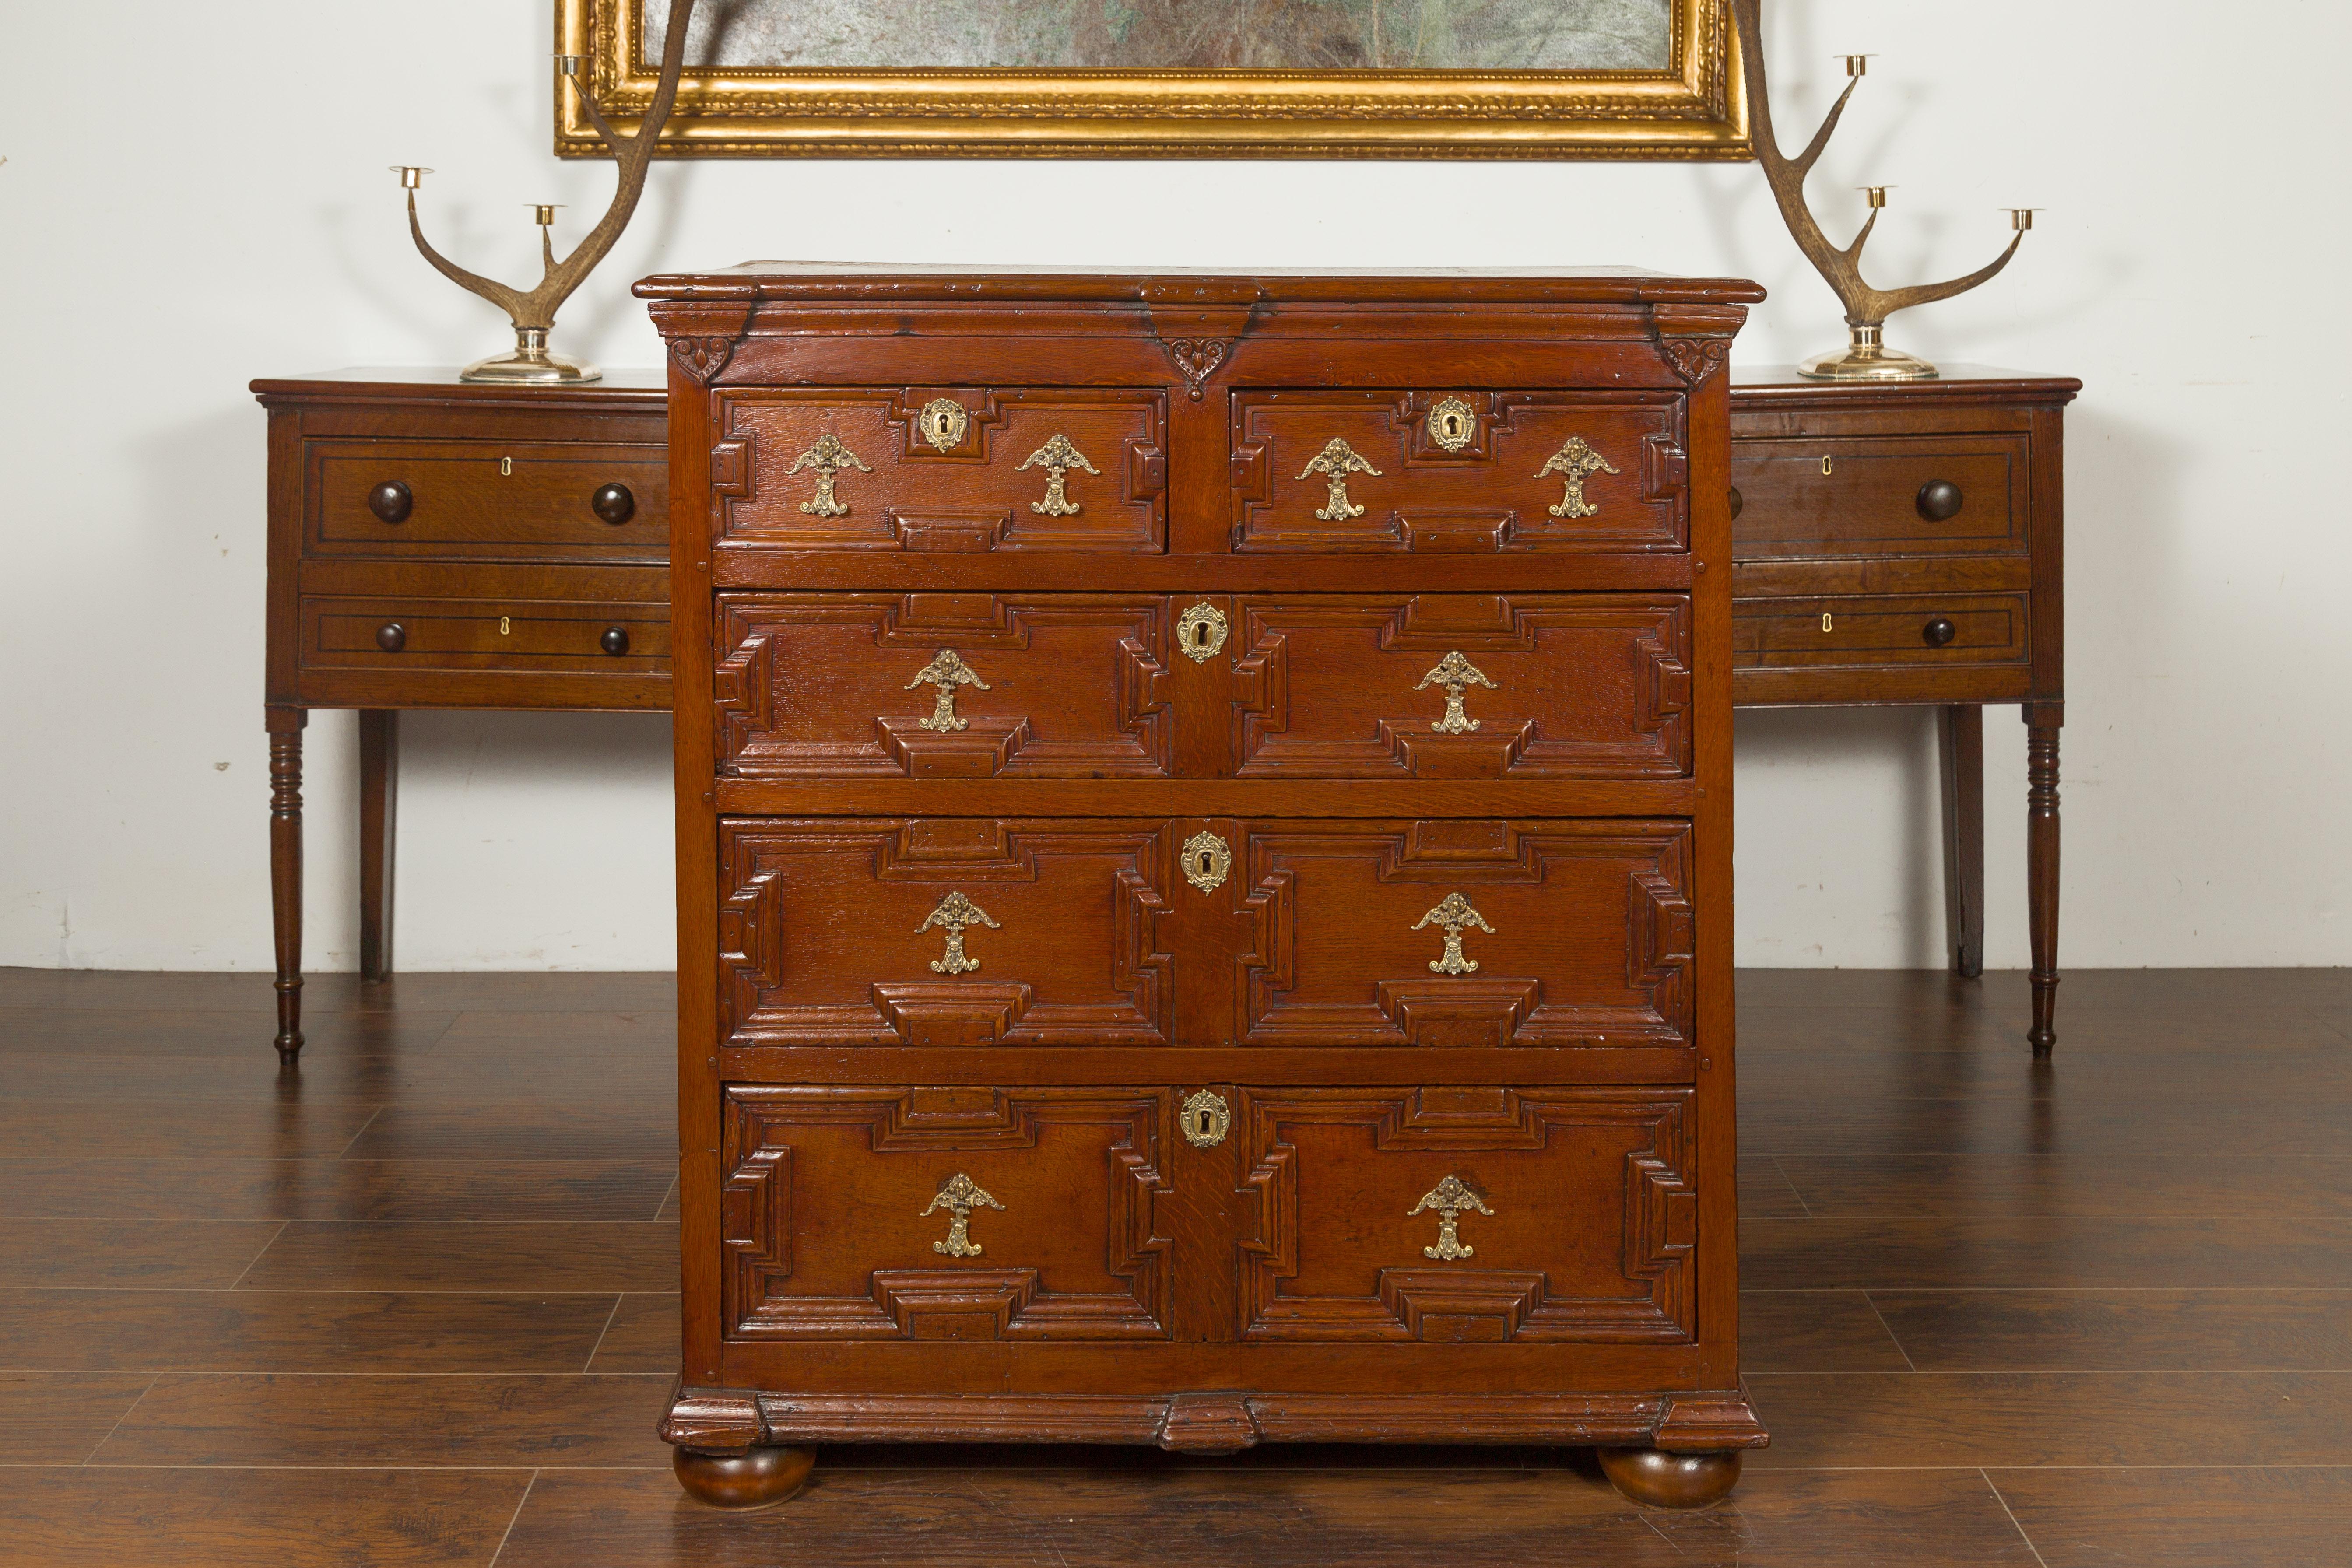 An English oak Georgian period geometric front five-drawer chest from the early 19th century, with heart motifs and ornate hardware. Born in England during the early years of the 19th century, this oak chest features a rectangular top with